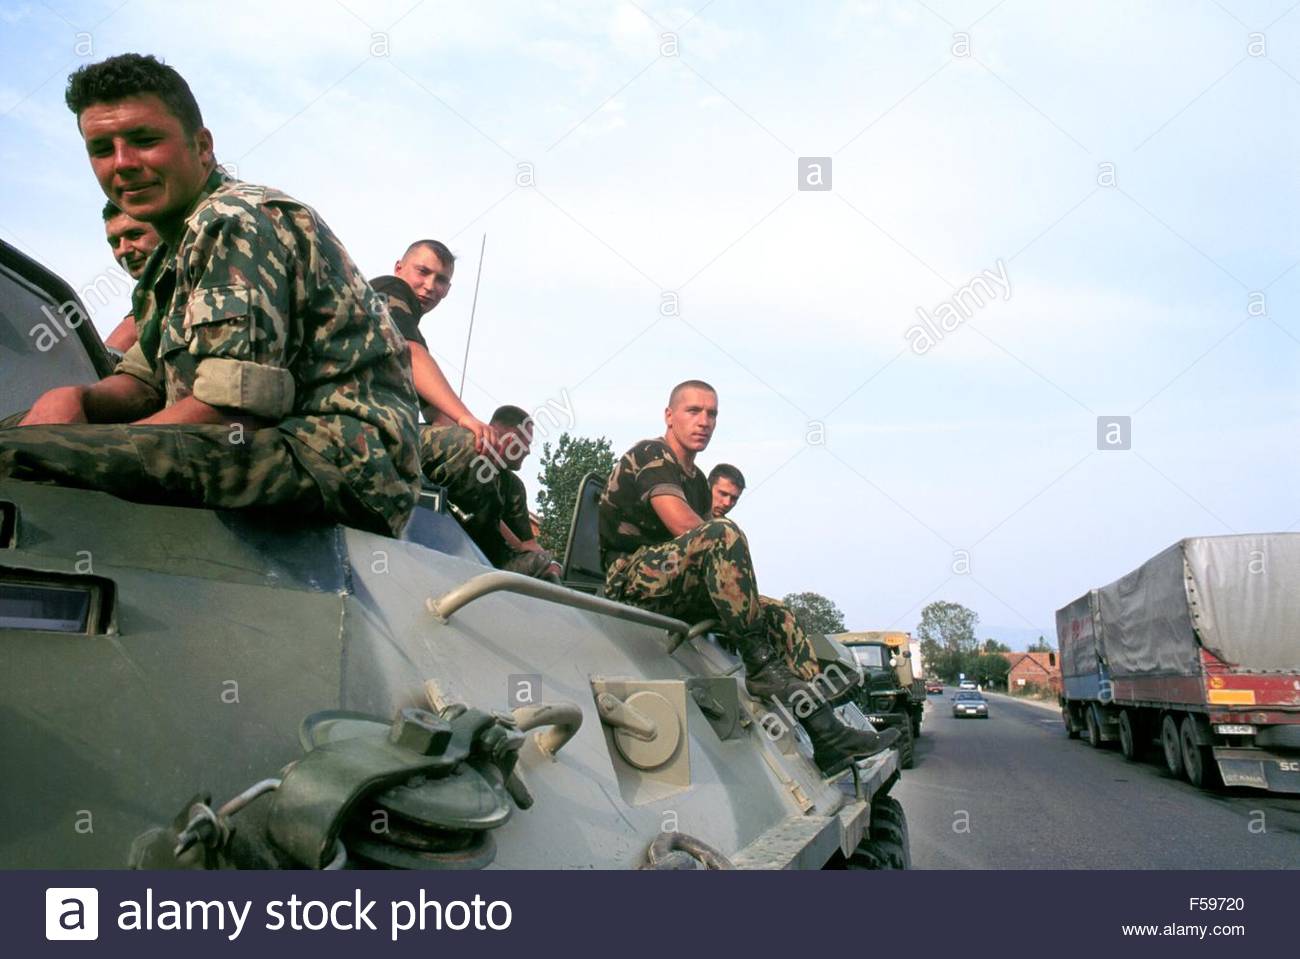 July 2000, checkpoint of Russian soldiers near Pristina airport.jpg